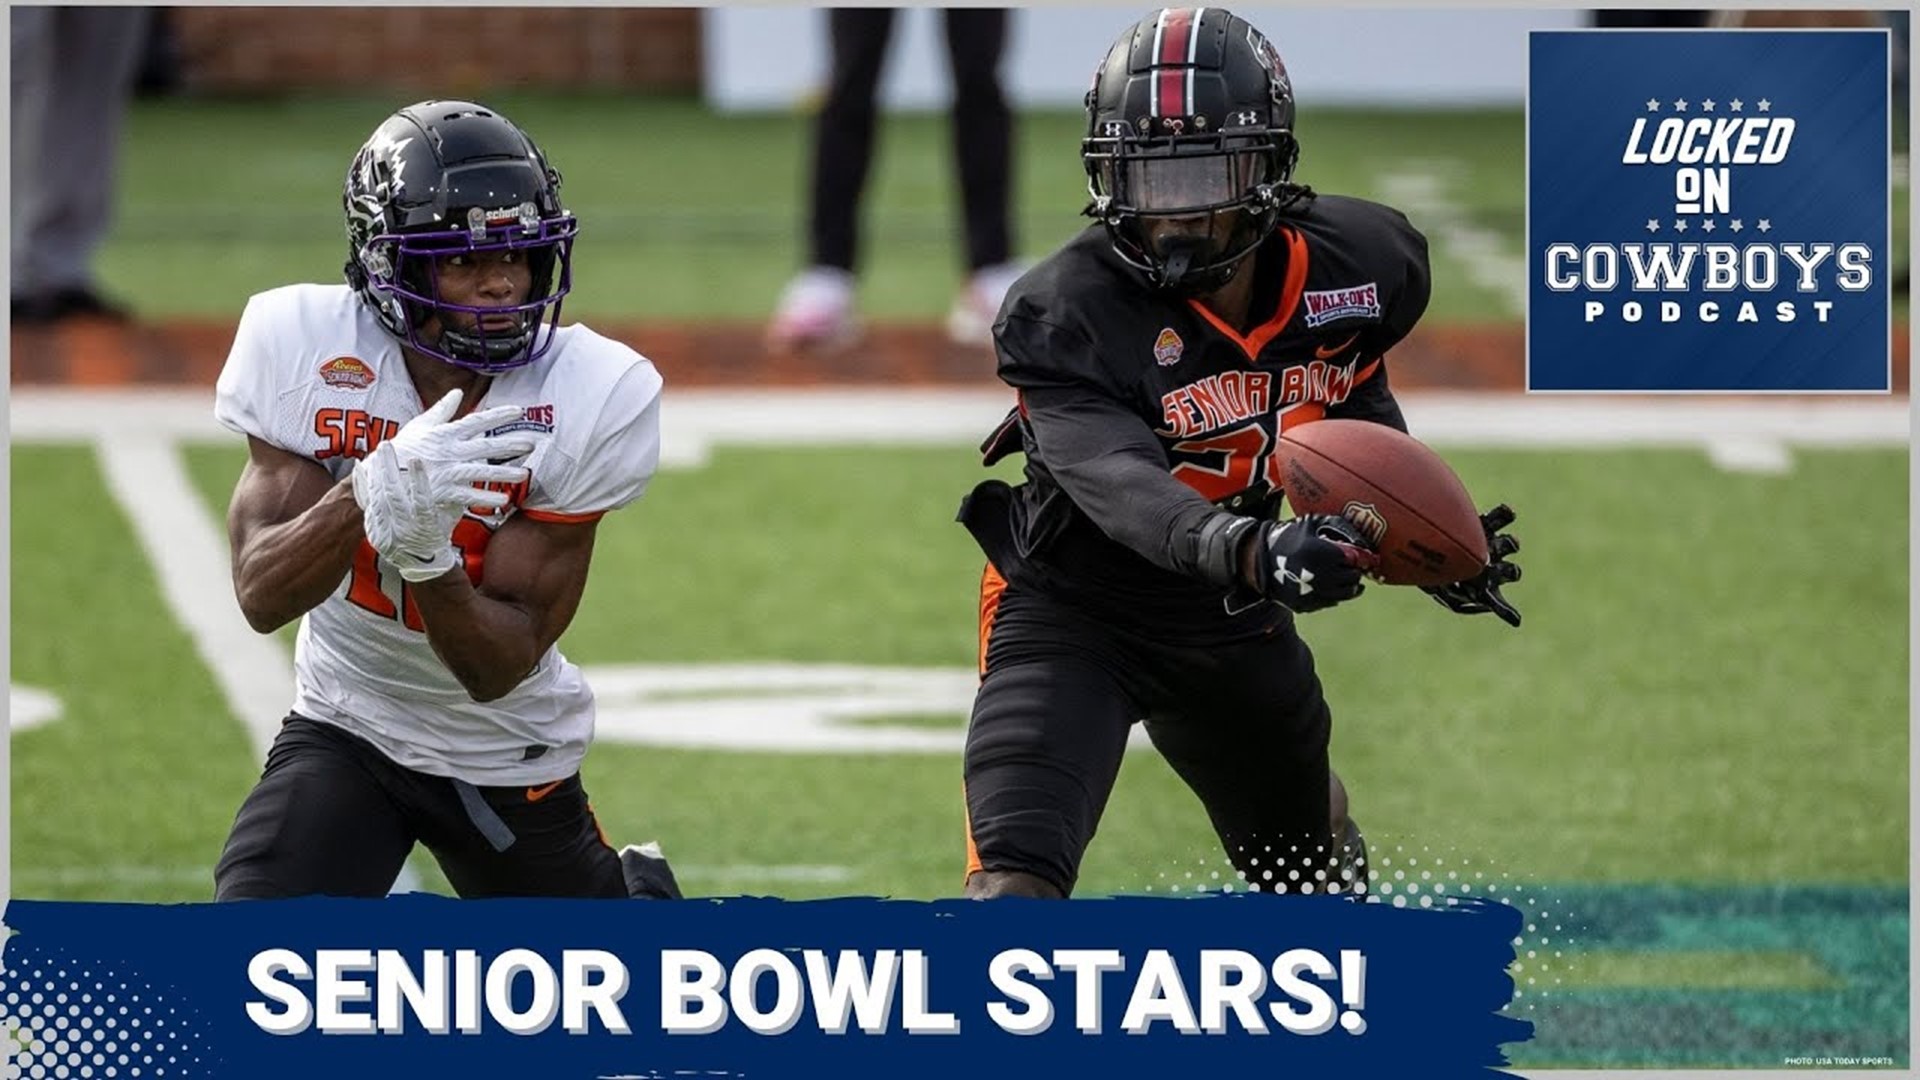 Marcus Mosher and Landon McCool discuss the biggest stars from the Senior Bowl practices, and talk which players the Dallas Cowboys have shown the most interest in.